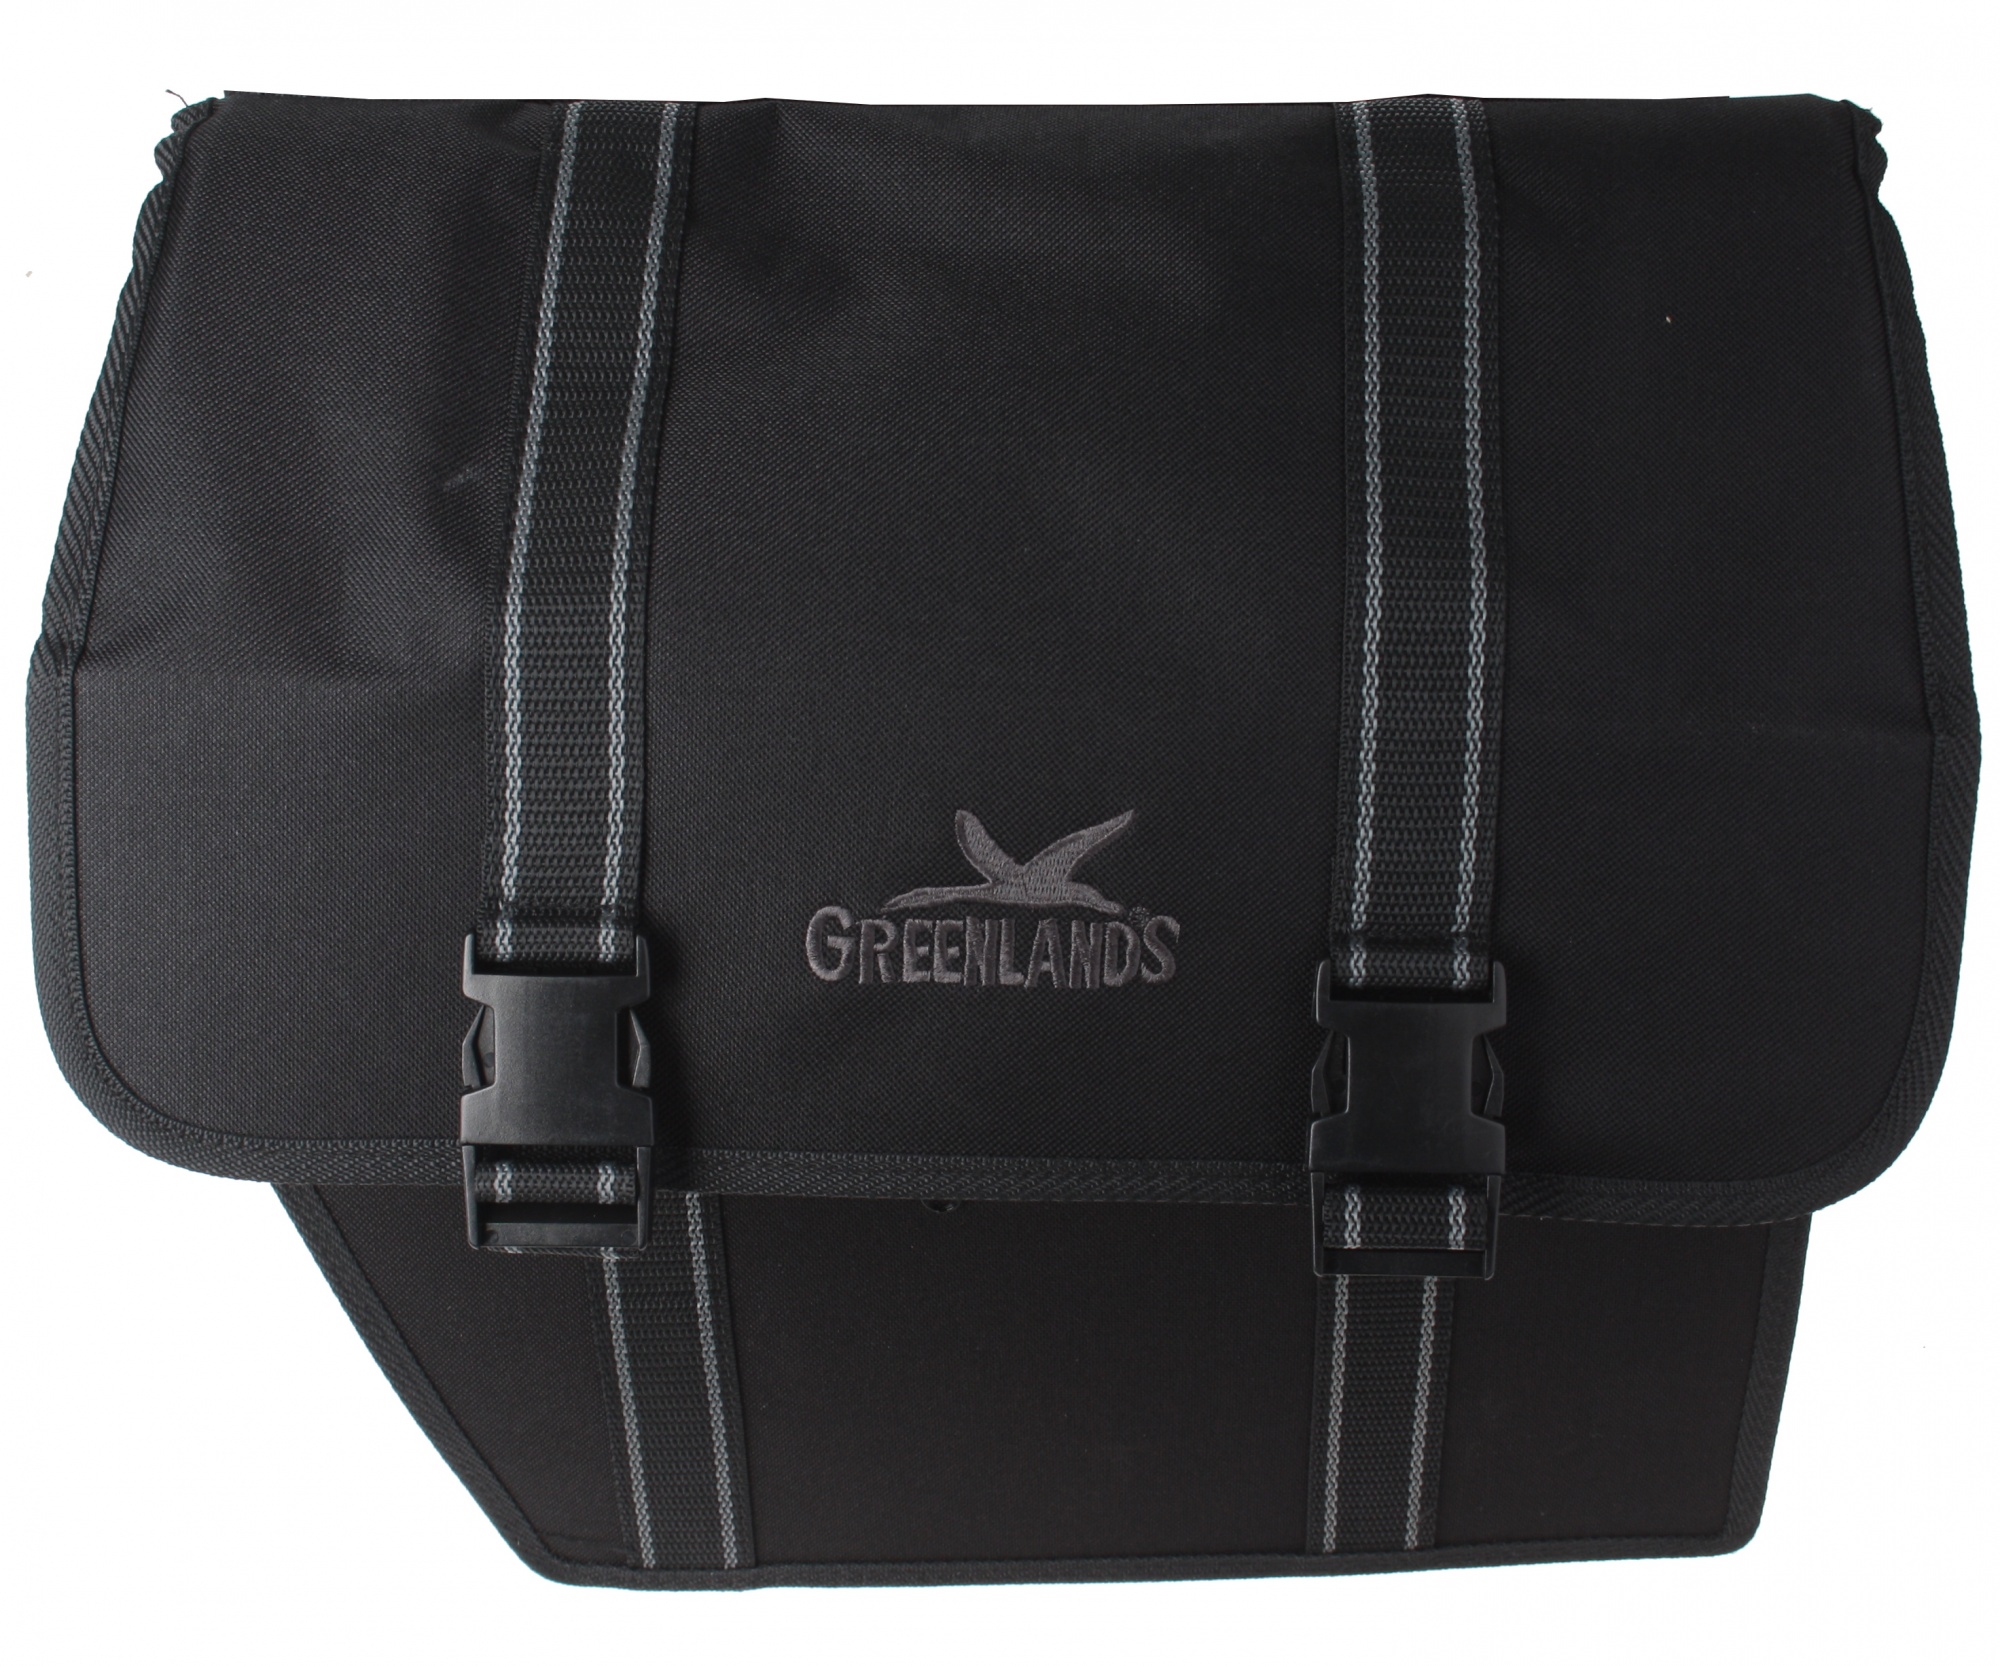 greenlands bicycle bags